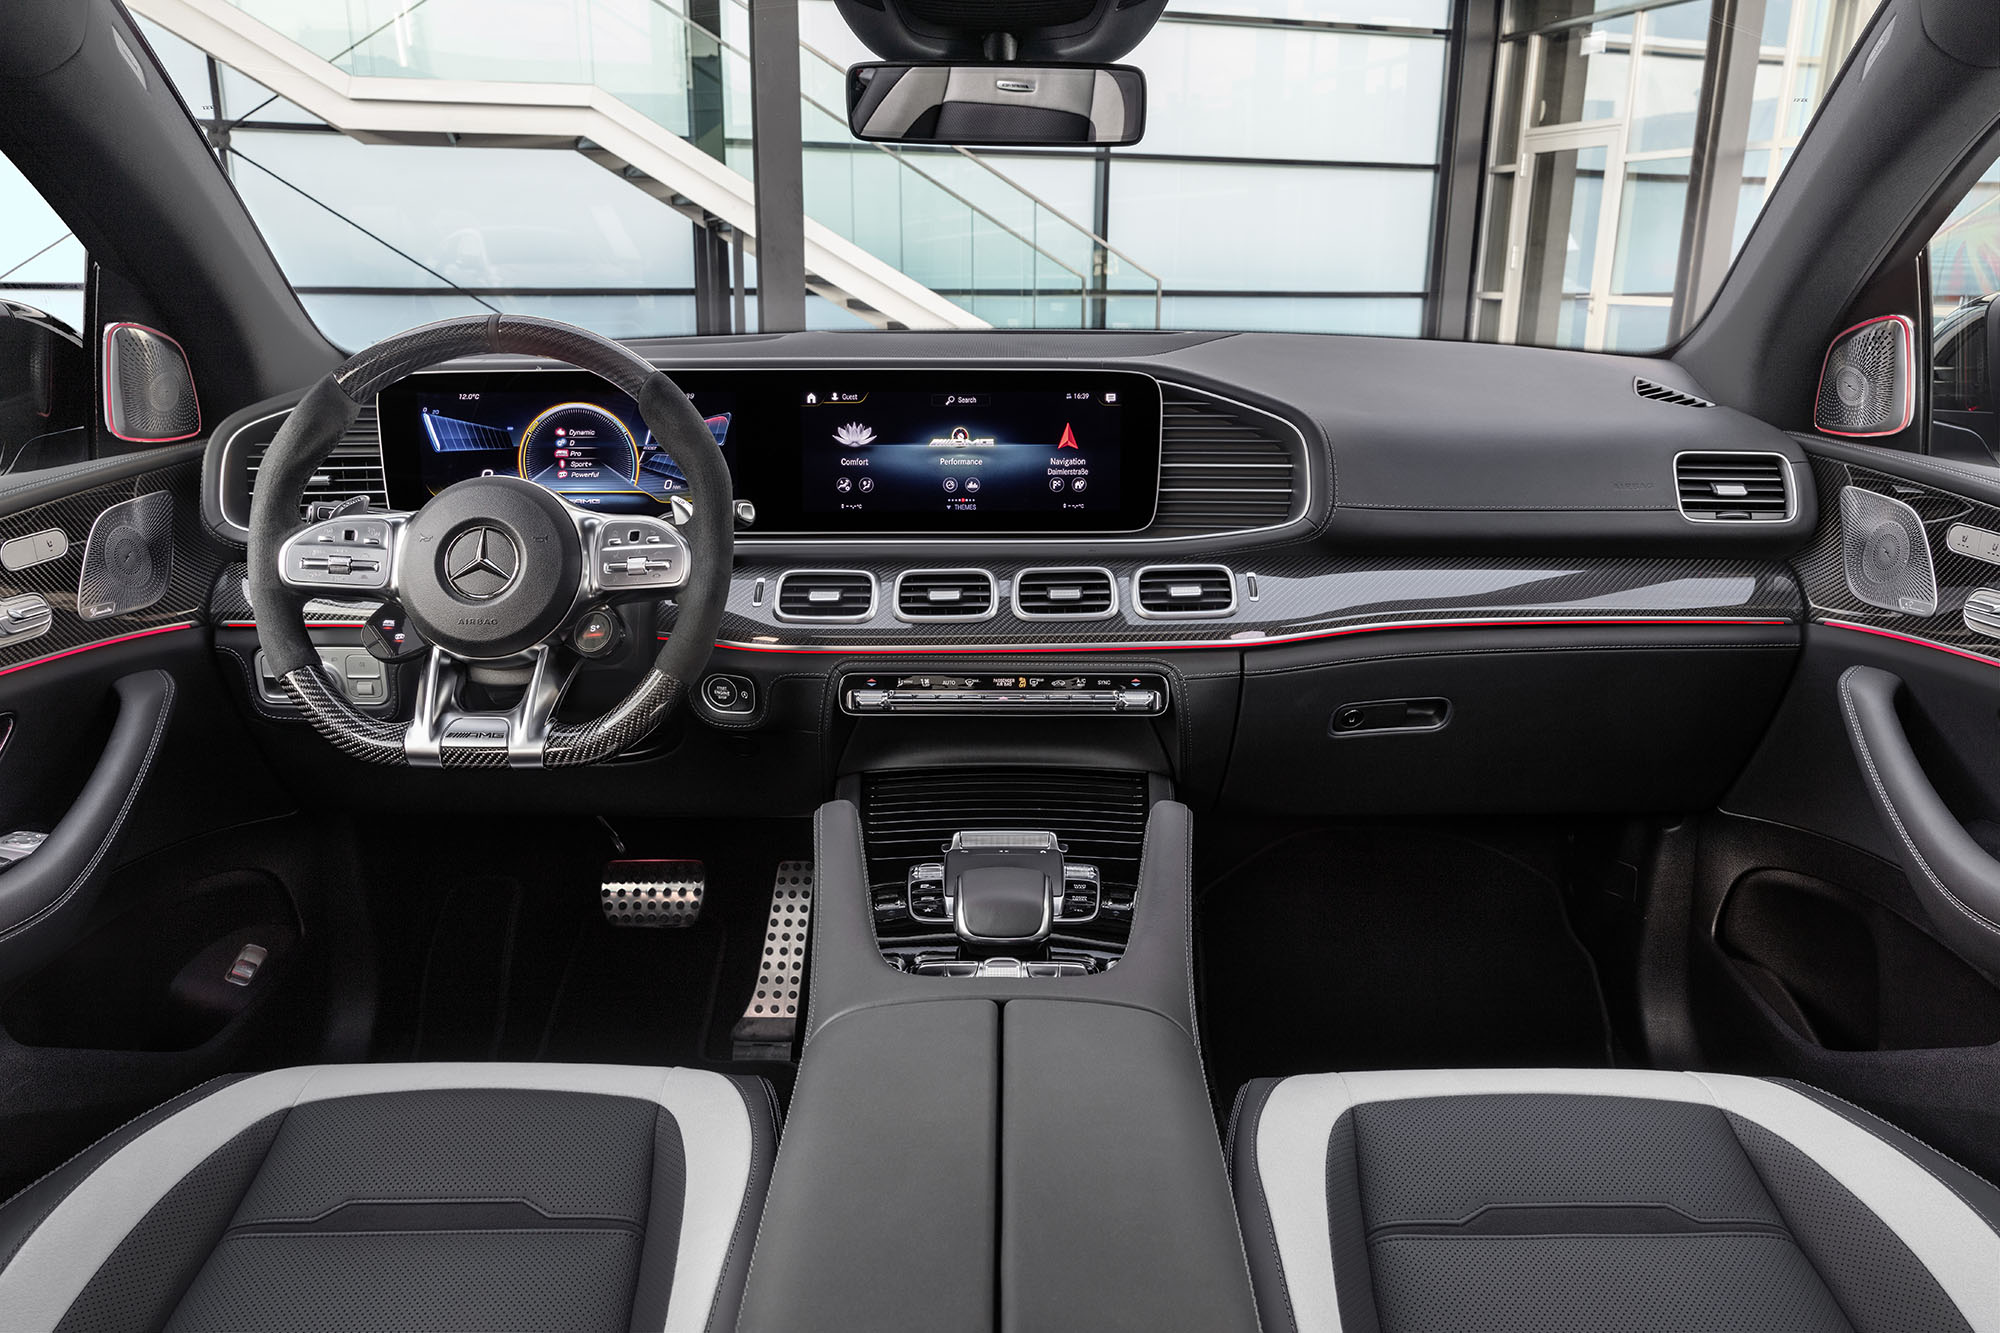 Mercedes-AMG GLE 63 S Coupe interior